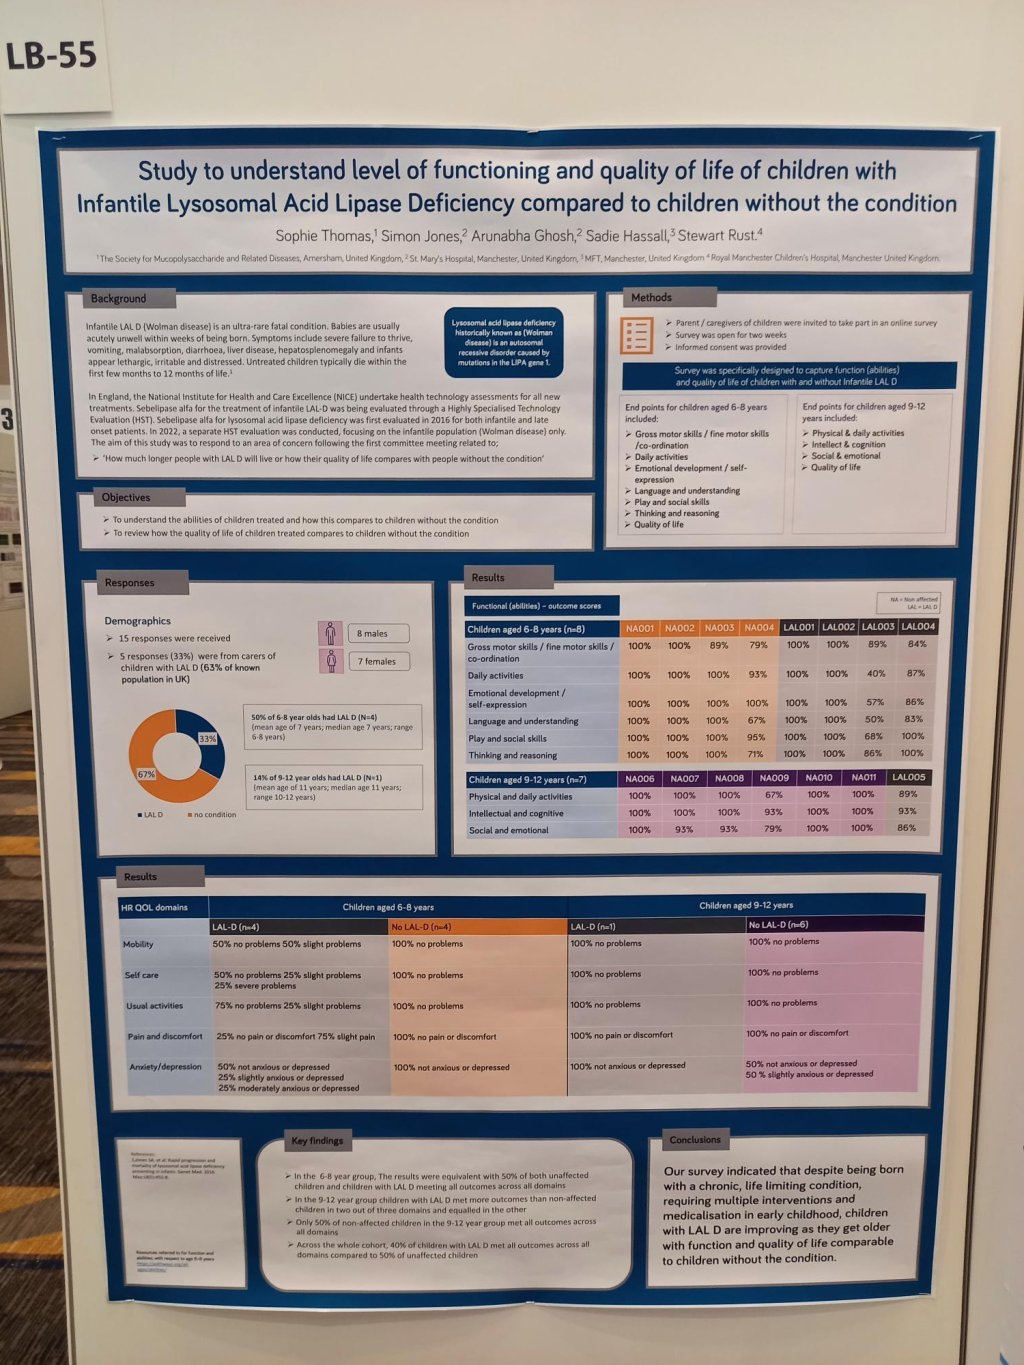 Poster about a Study to understand level of functioning and quality of life of children with Infantile Lysosomal Acid Lipase Deficiency compare to children without the condition.